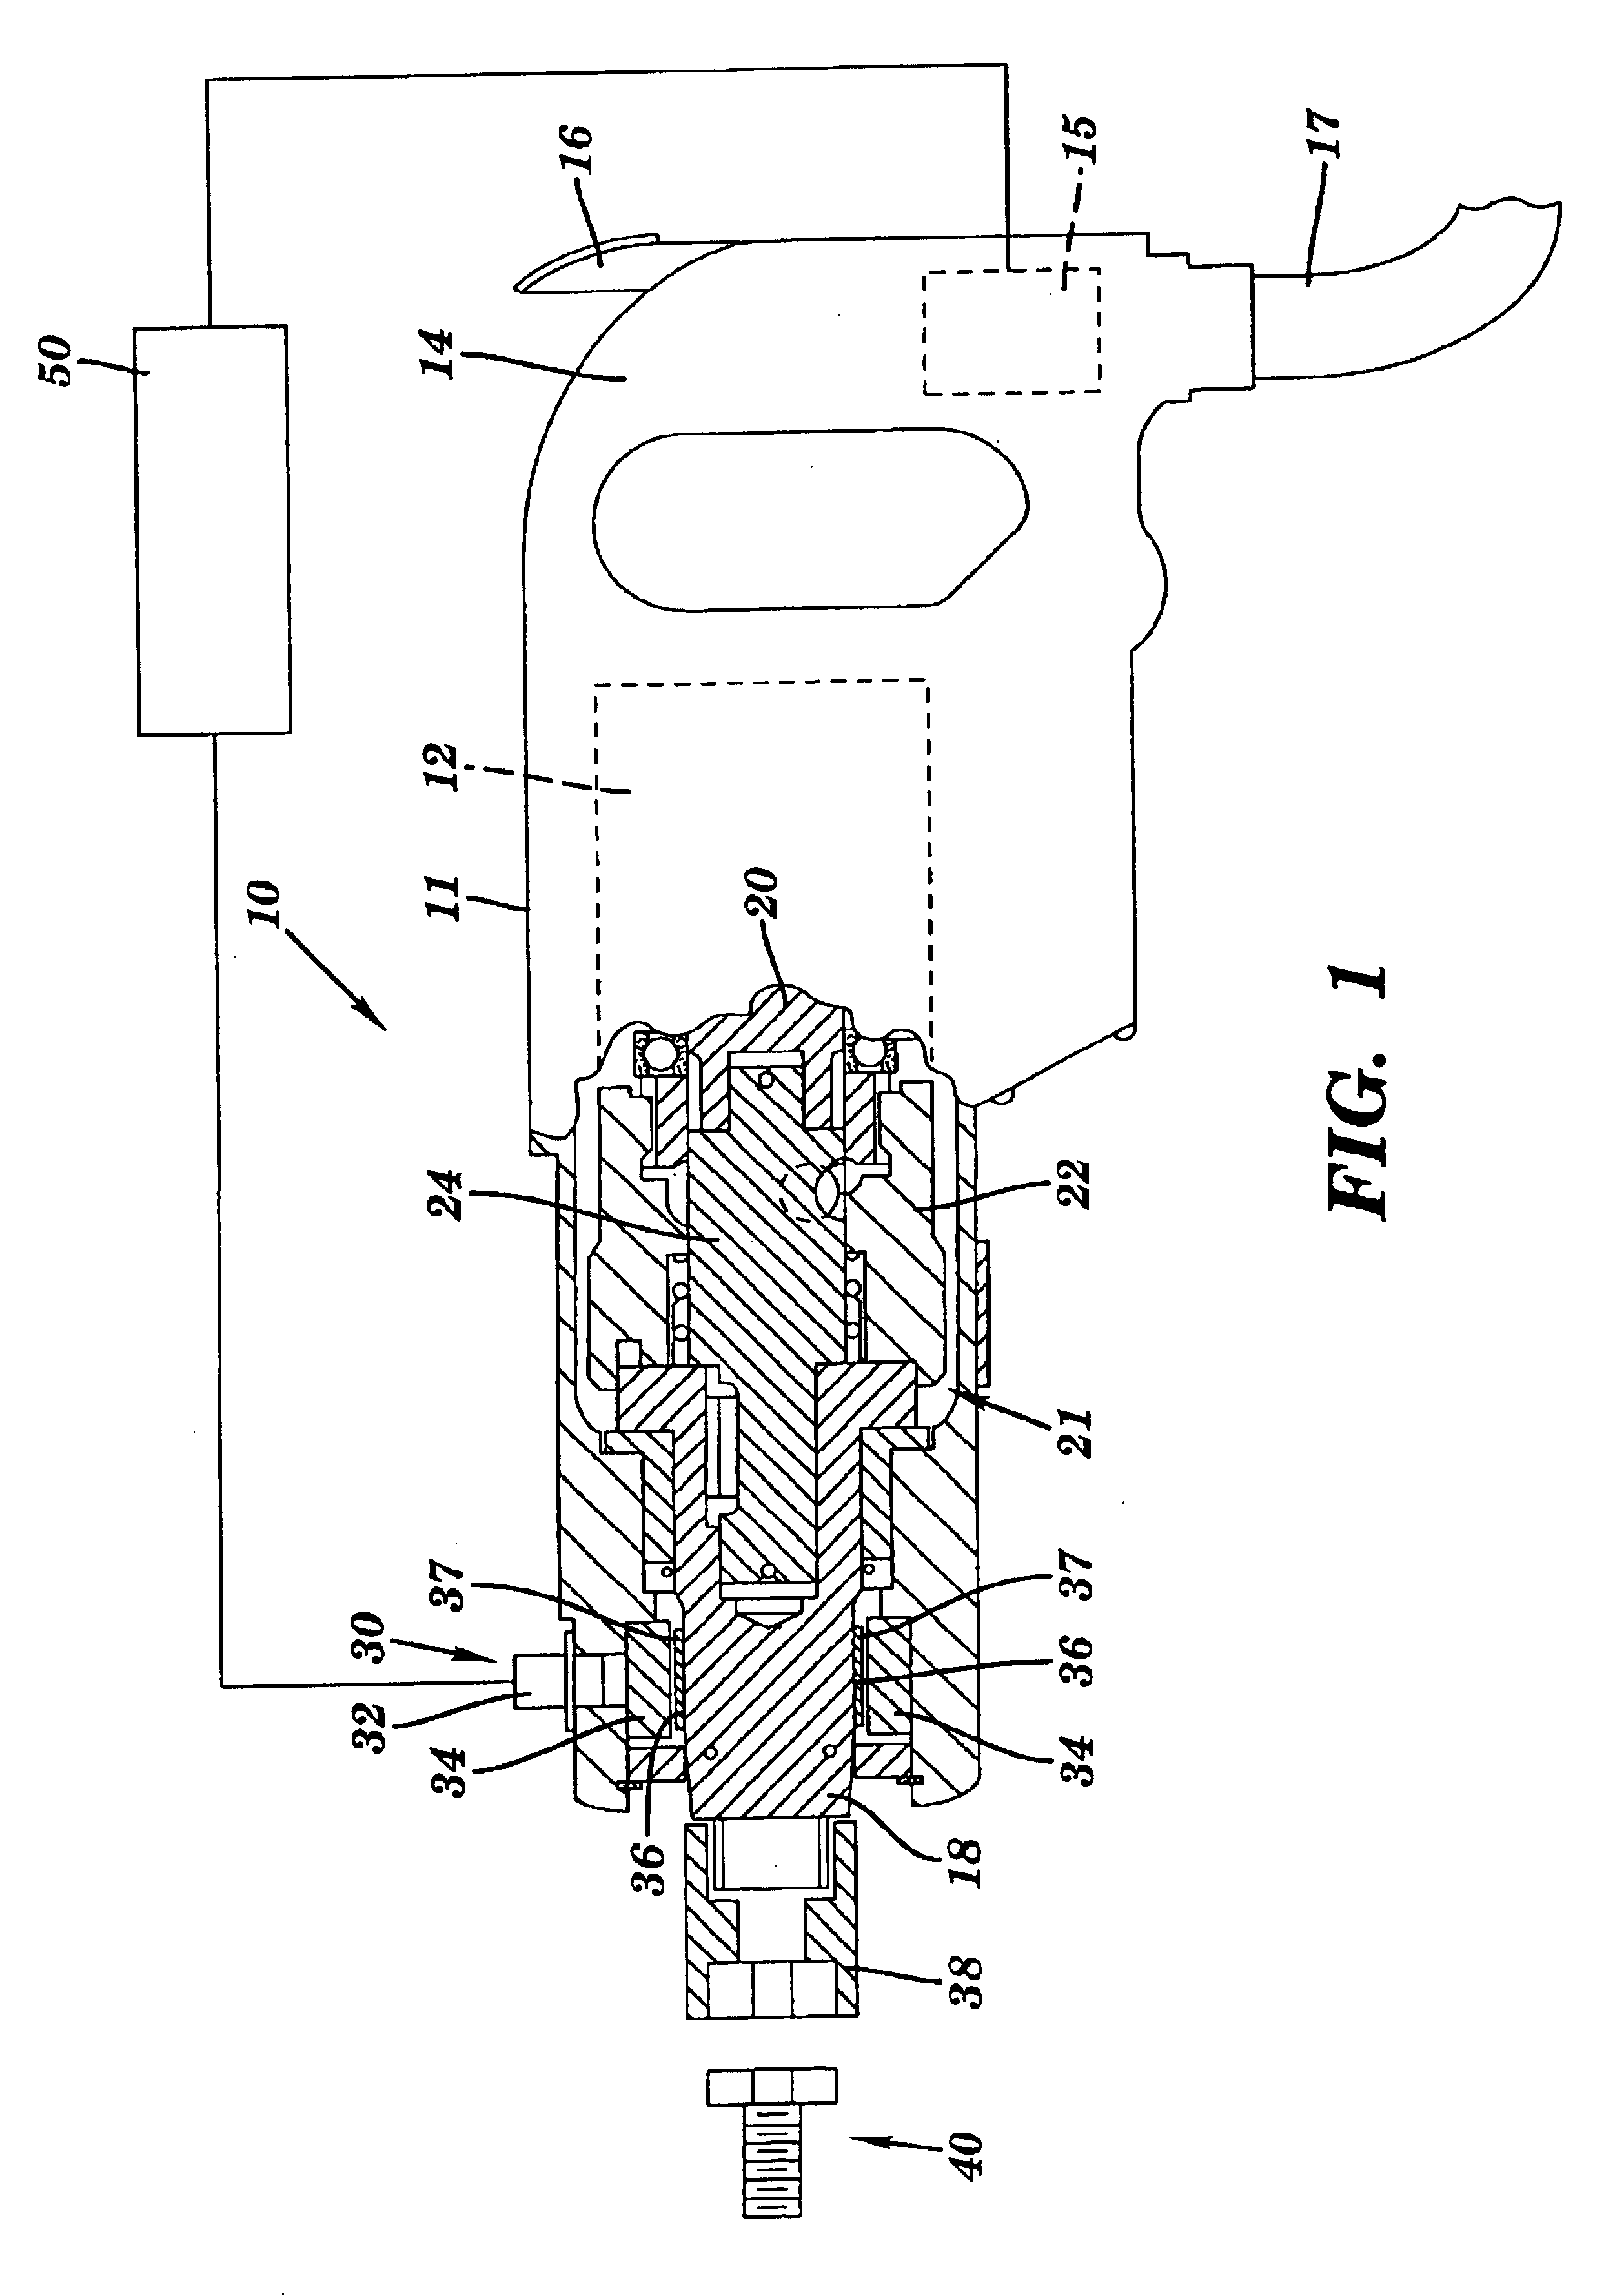 Processes of determining torque output and controlling power impact tools using a torque transducer